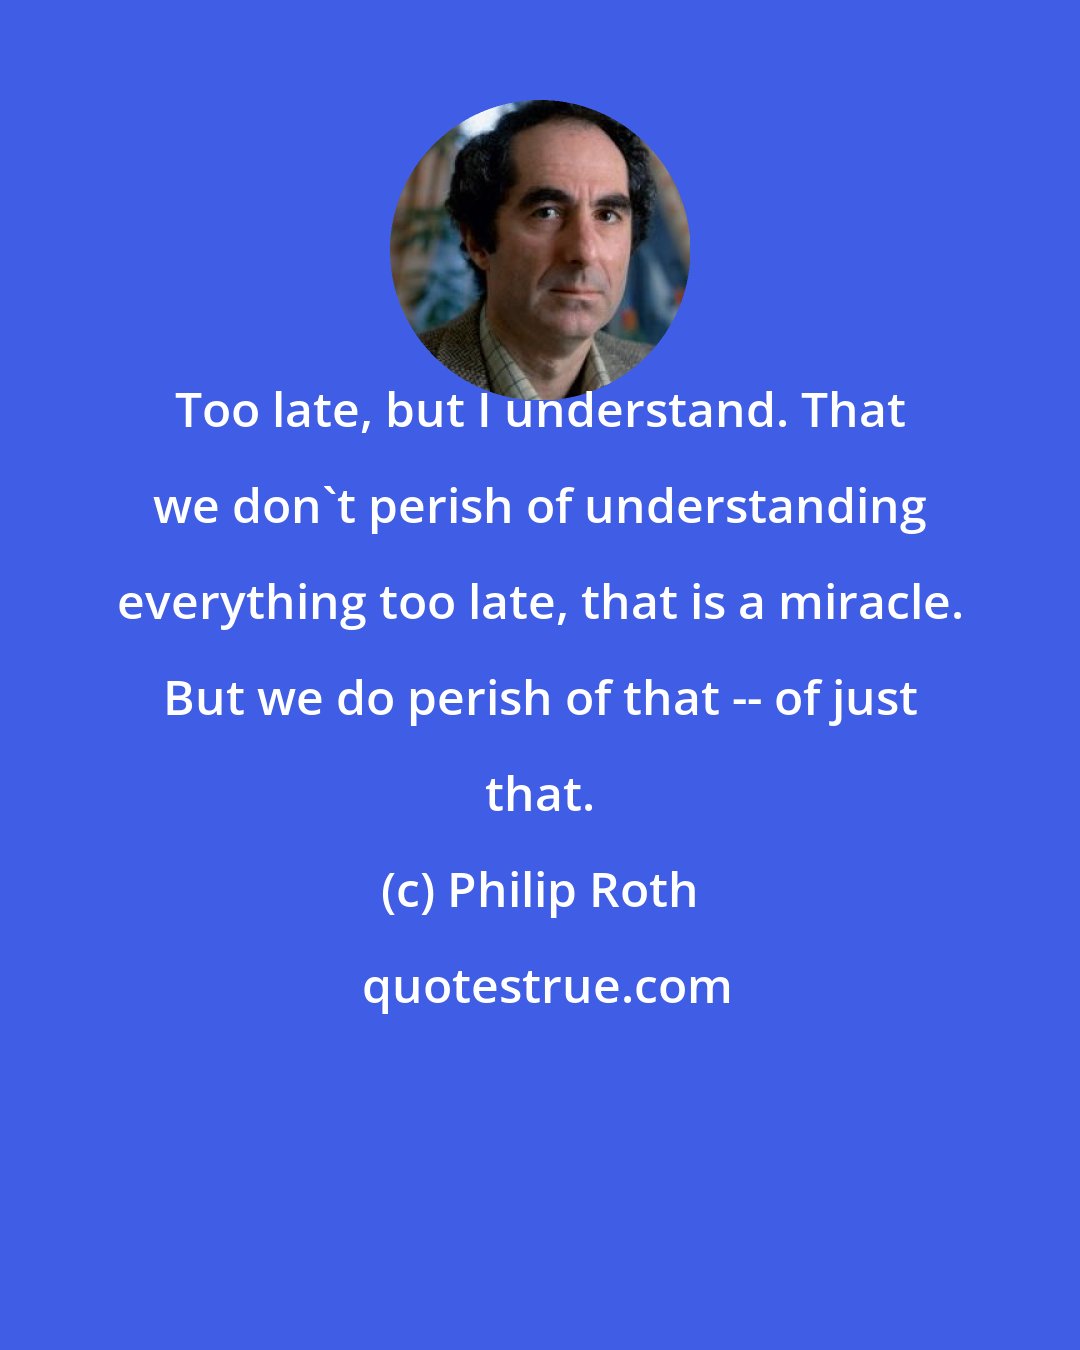 Philip Roth: Too late, but I understand. That we don't perish of understanding everything too late, that is a miracle. But we do perish of that -- of just that.